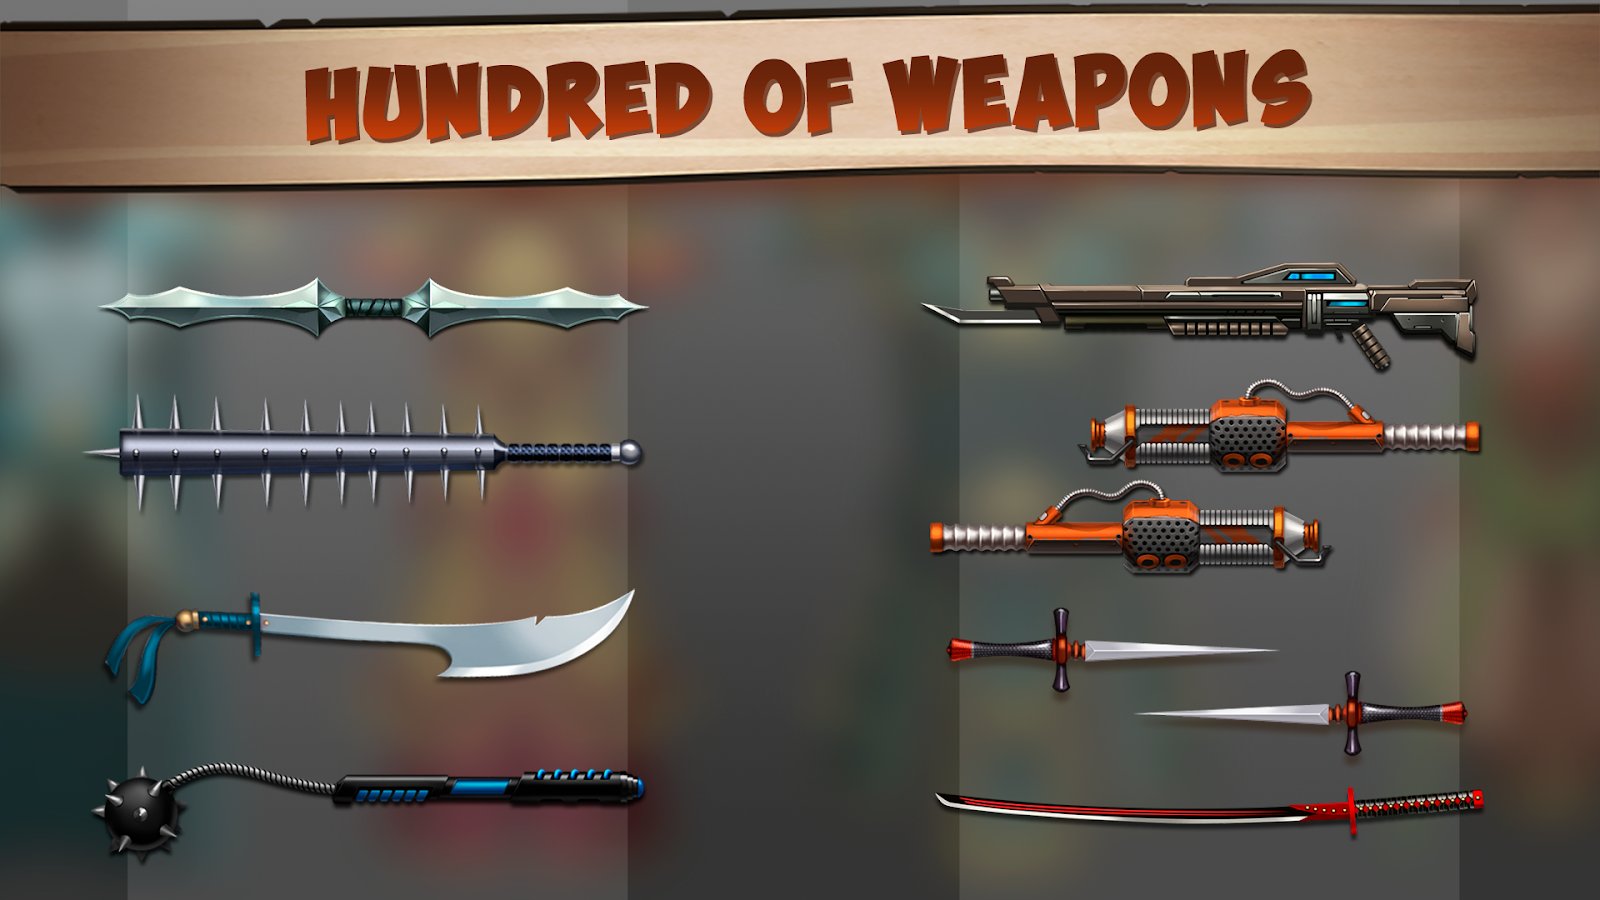 shadow fight 2 weapon download